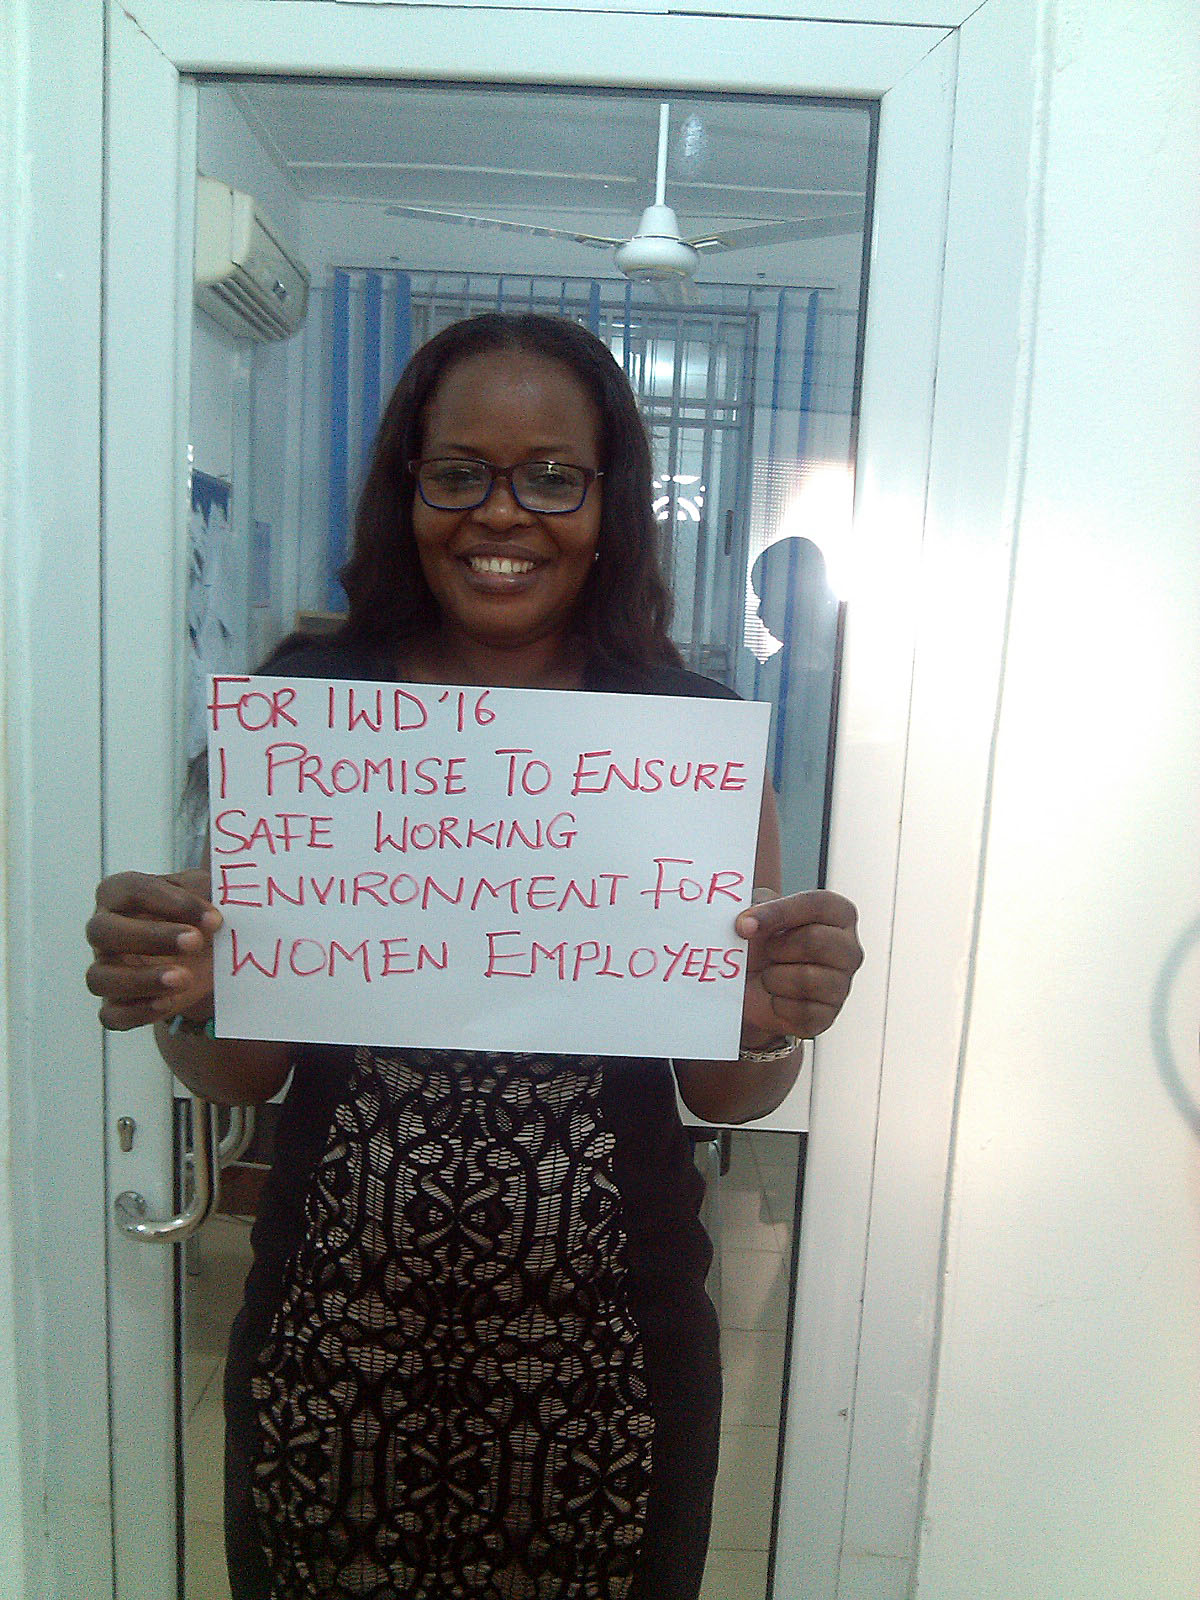 "For IWD ’16, I promise to ensure safe working environment for women employees"